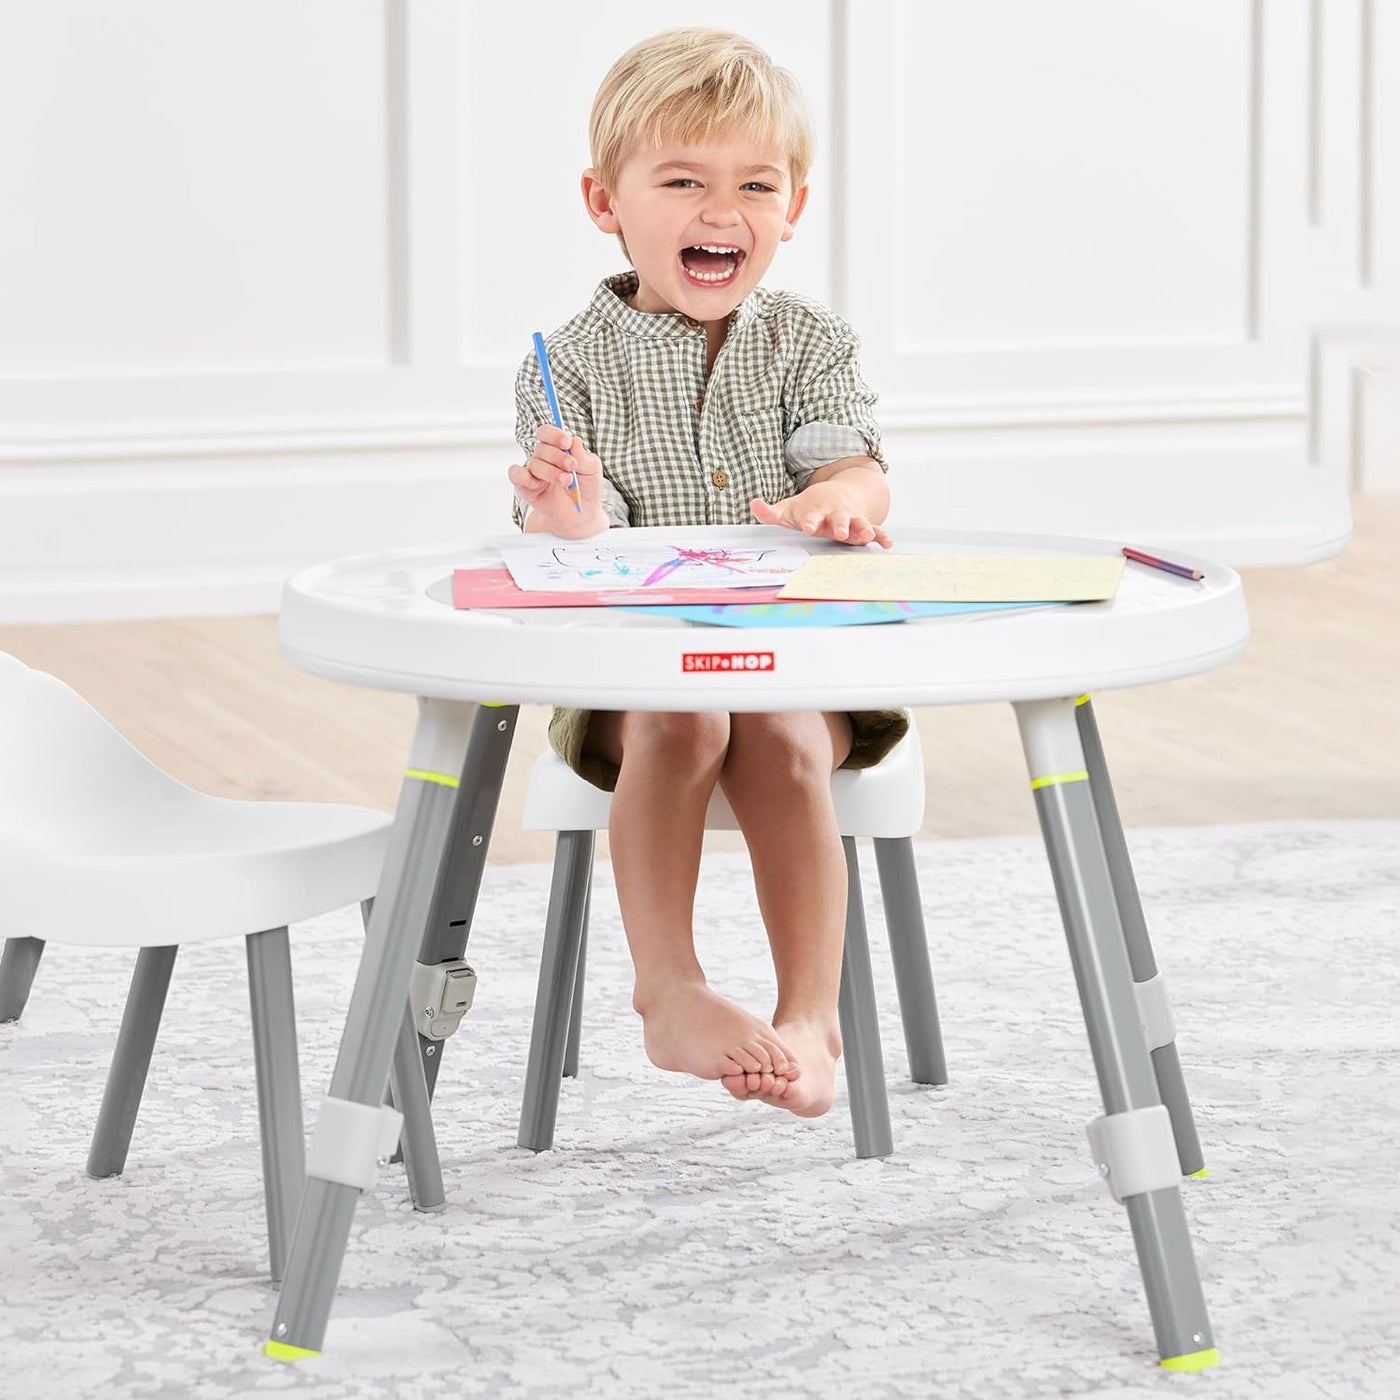 Skip Hop Silver Lining Cloud Baby's View 3-Stage Activity Center